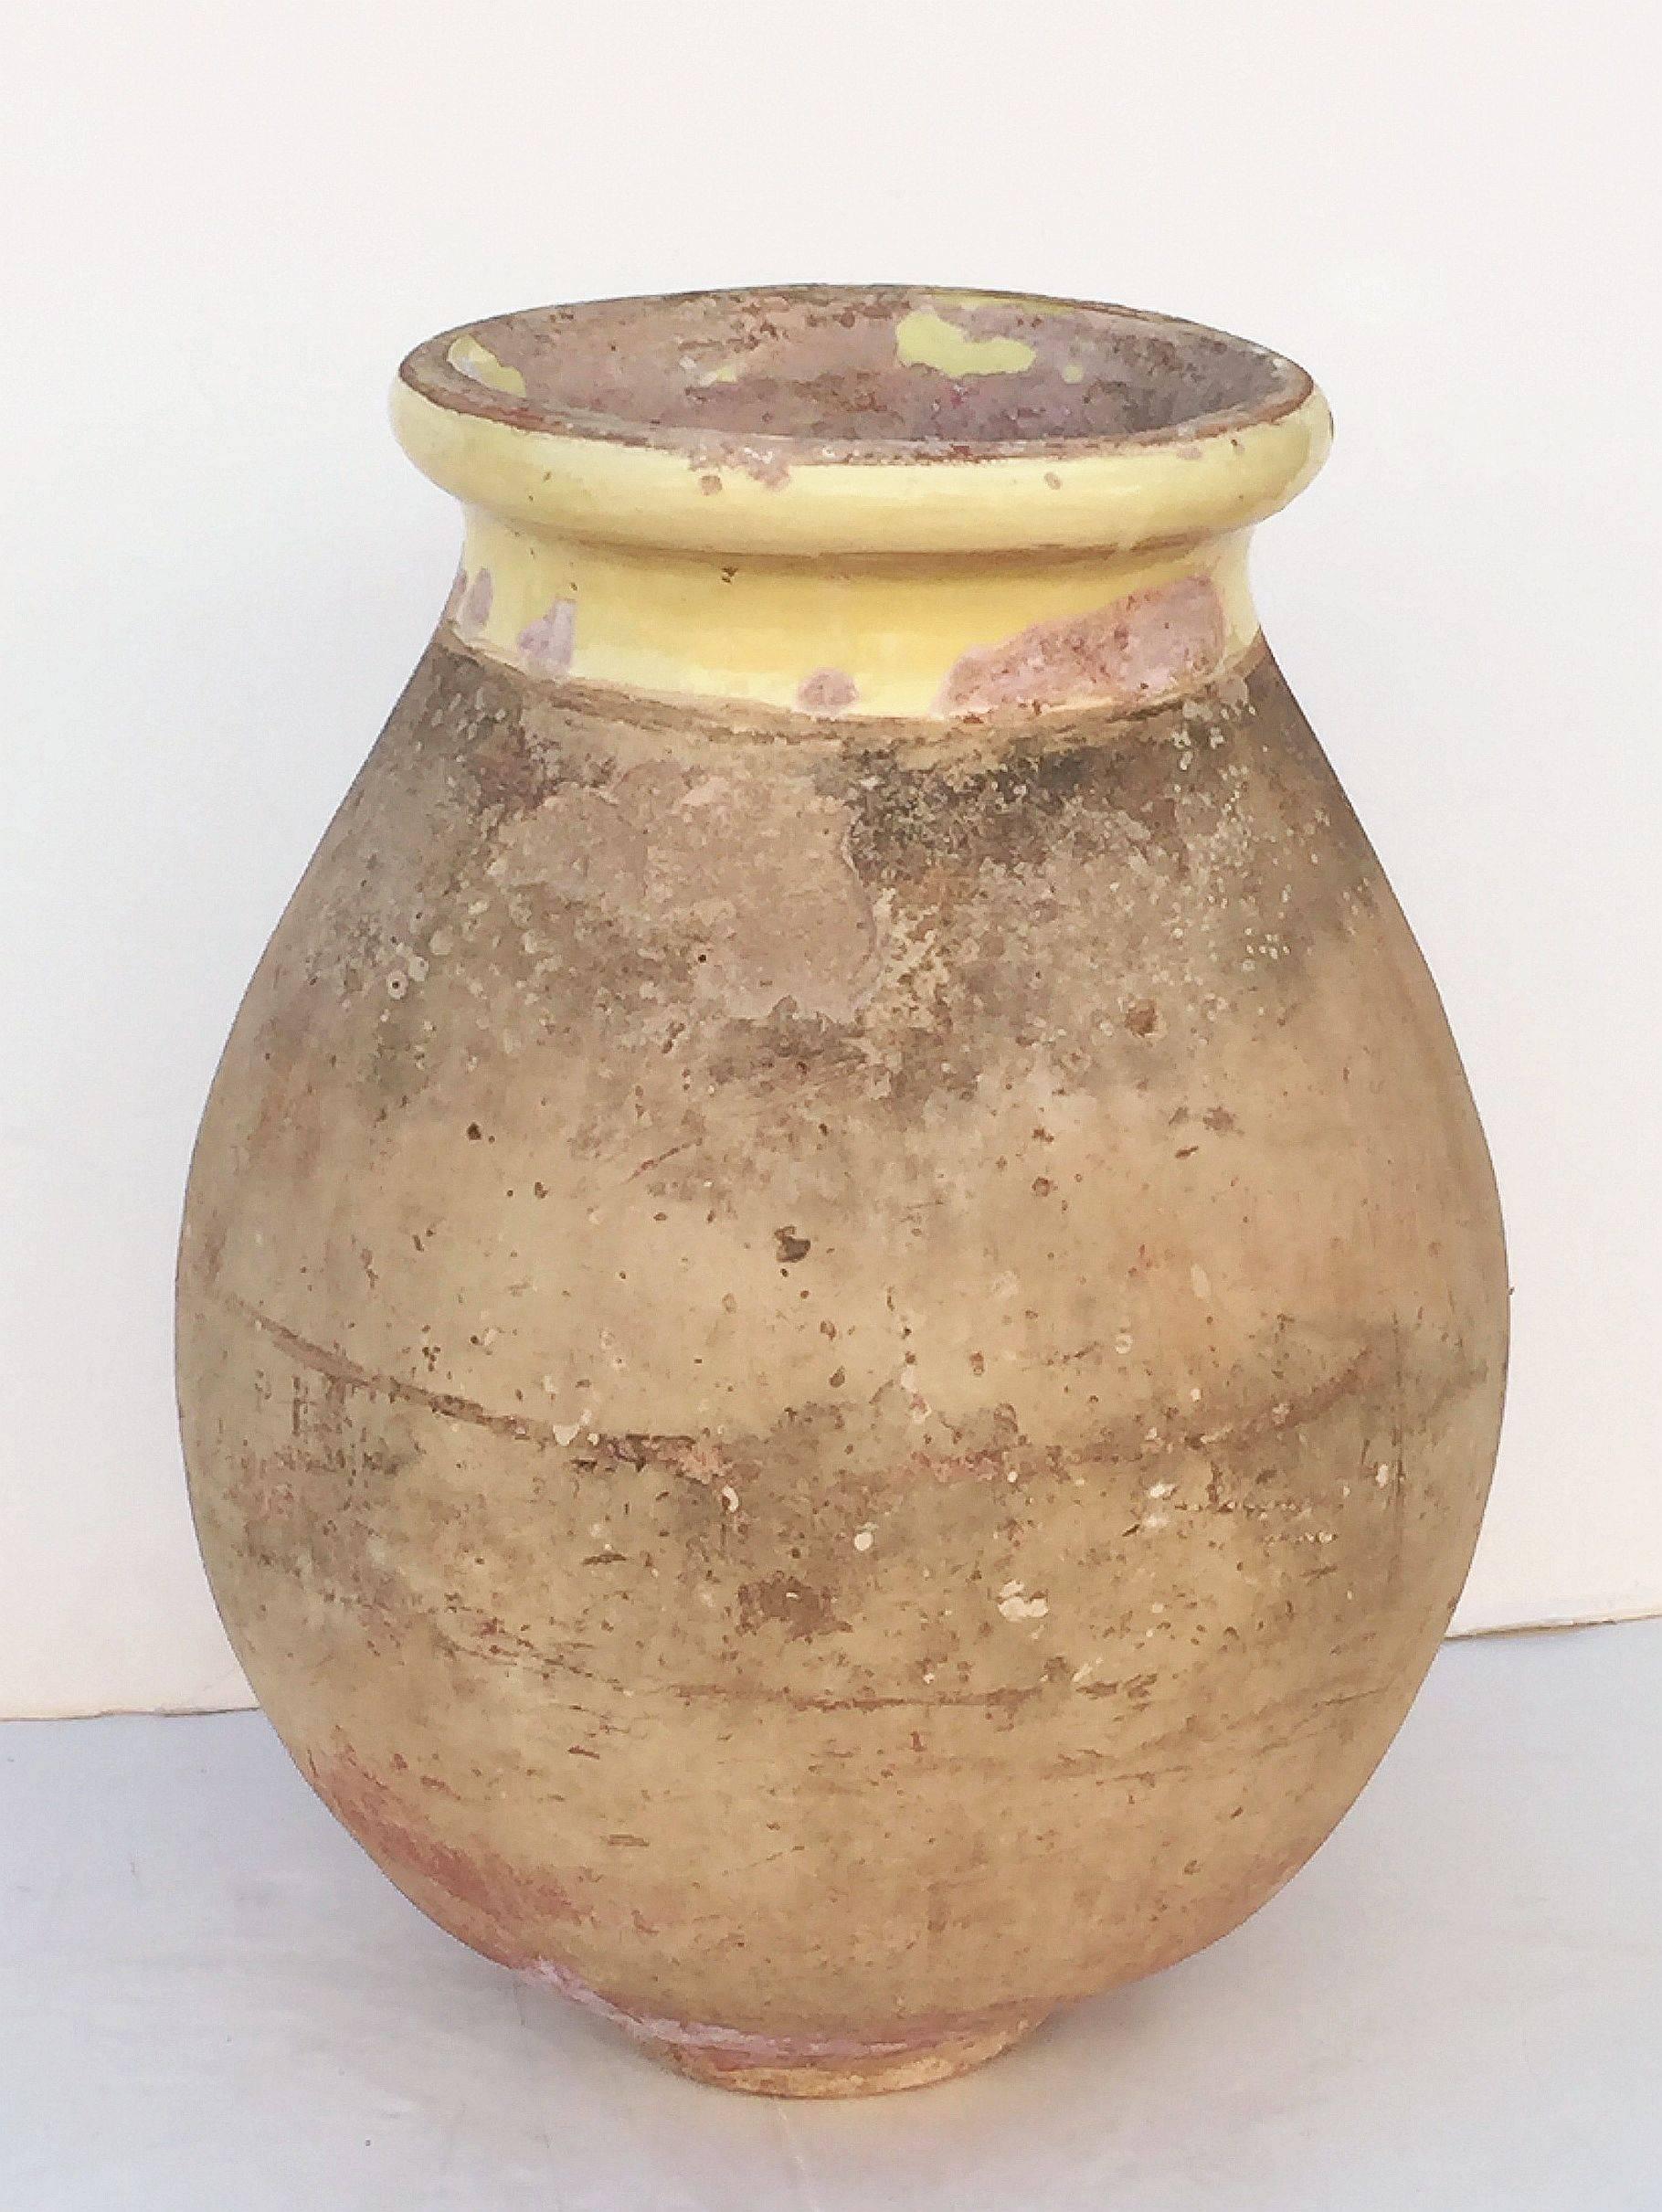 A handsome French garden pot or oil jar from the Biot, Alpes-Maritimes, region known as a pottery centre from the 18th century onward.

Featuring a glazed rolled-edge top over a smooth, cylindrical body and functional as a garden ornament, fountain,